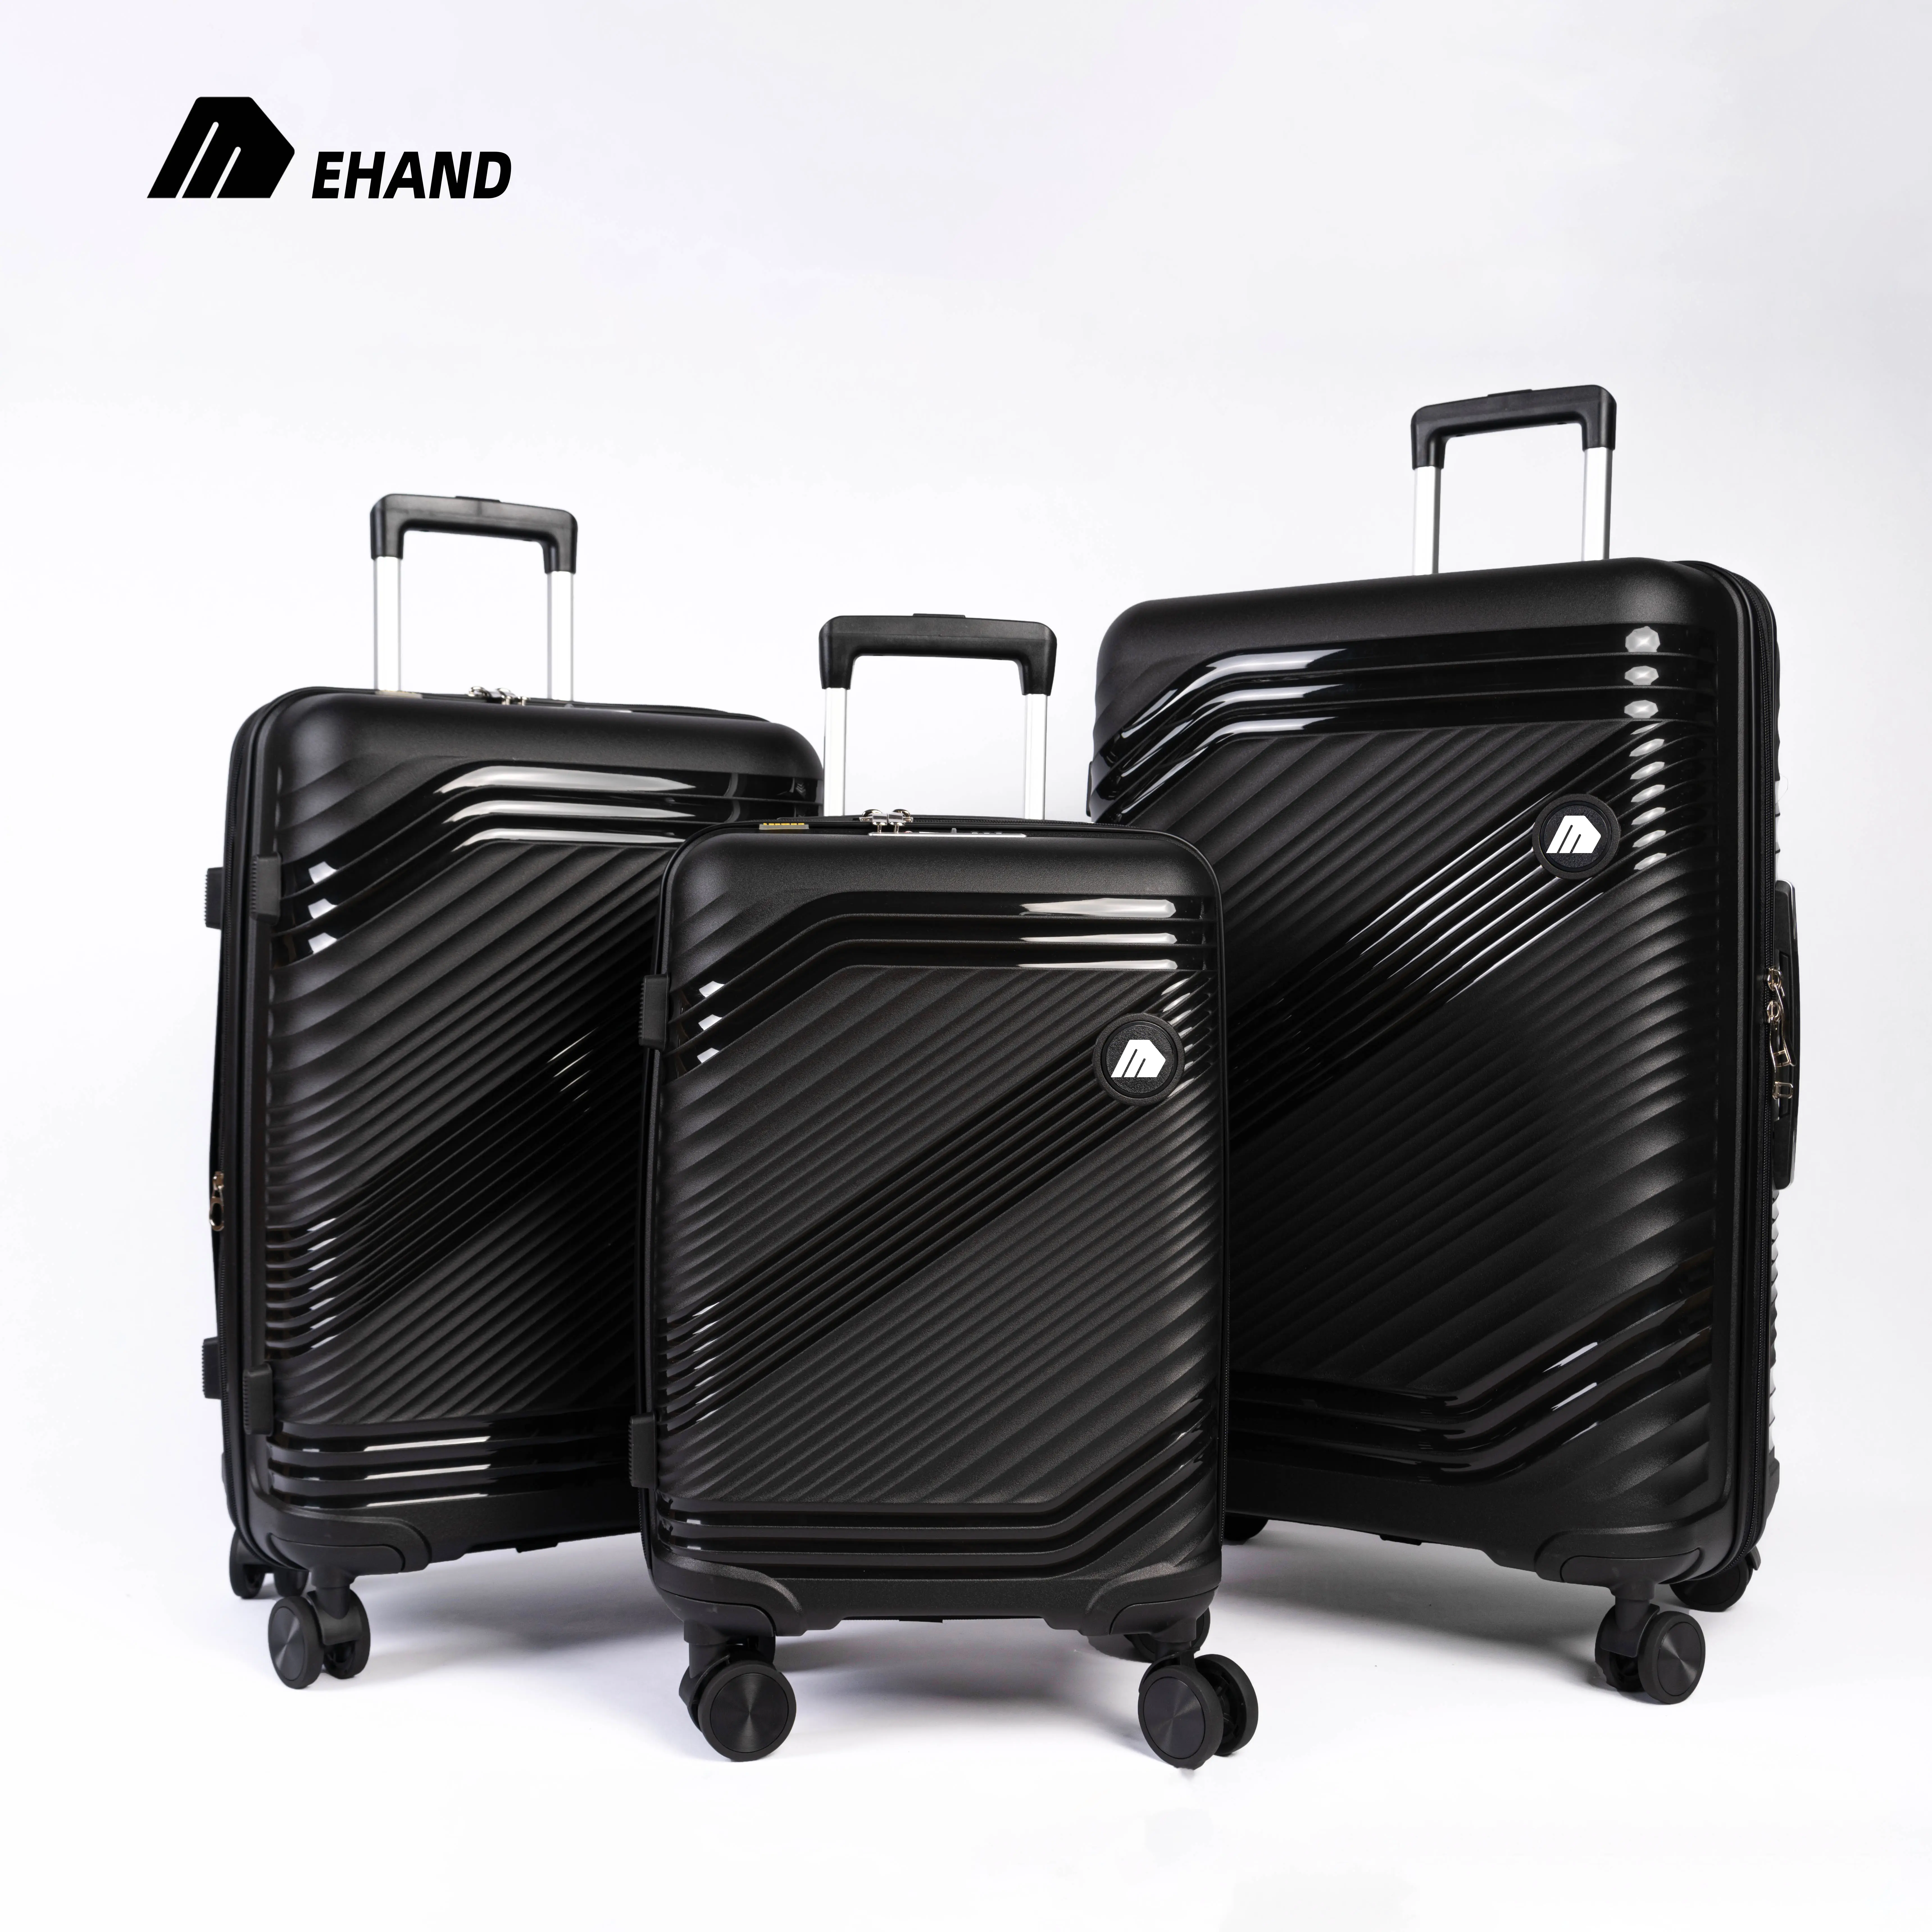 Ehand New Model PP 3pcs Valise Koffer Sets Travel Luggage Sets Suitcase with Ready bag